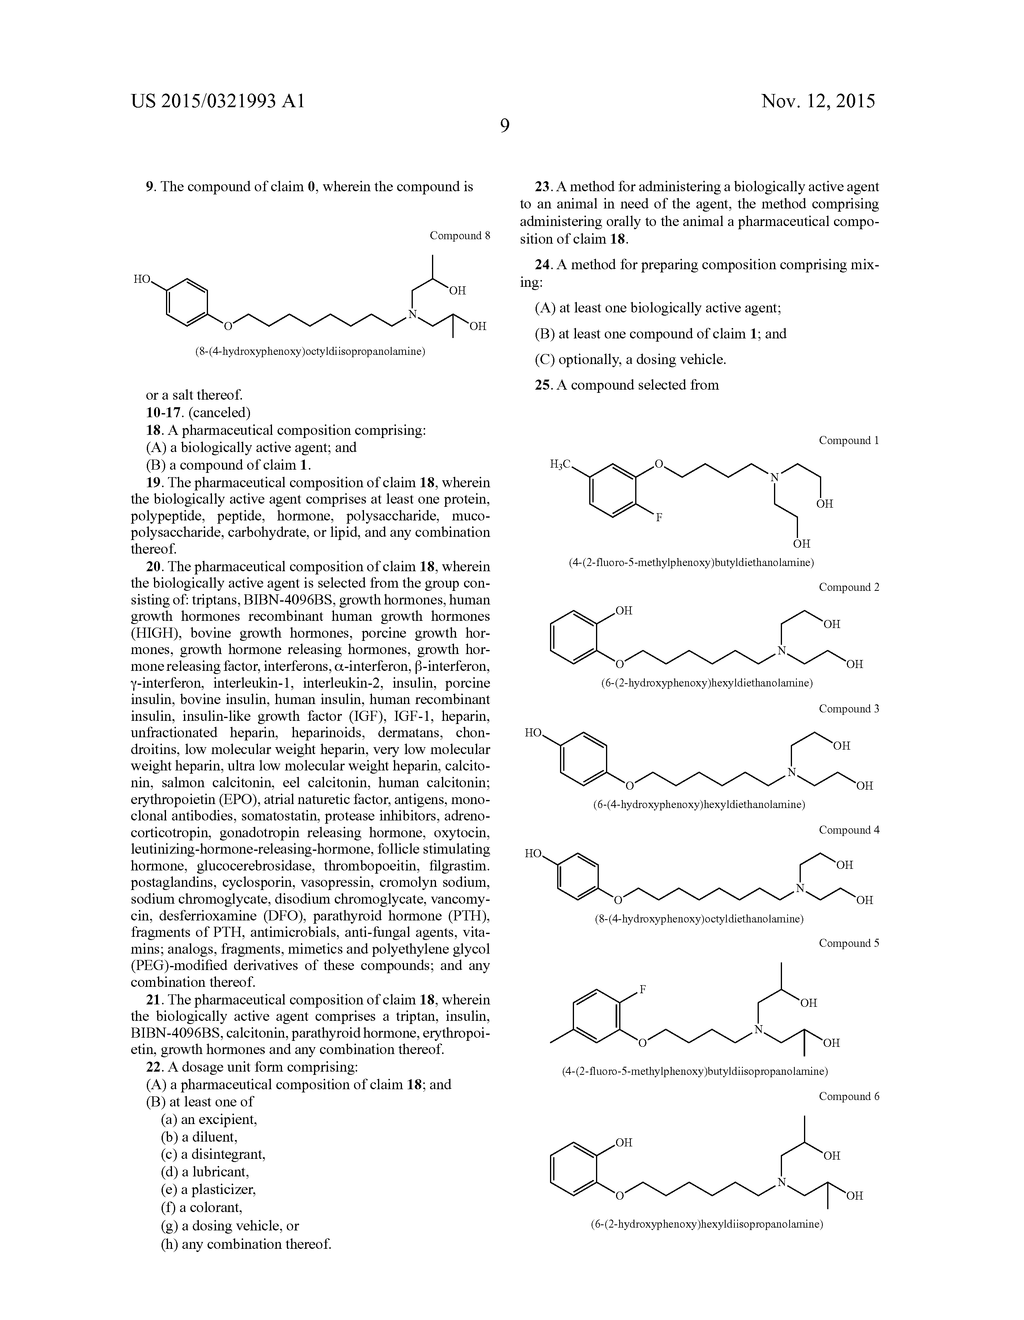 PHENOXY ALKYL DIETHANOLAMINE AND DIISOPROPANOLAMINE COMPOUNDS FOR     DELIVERING ACTIVE AGENTS - diagram, schematic, and image 10